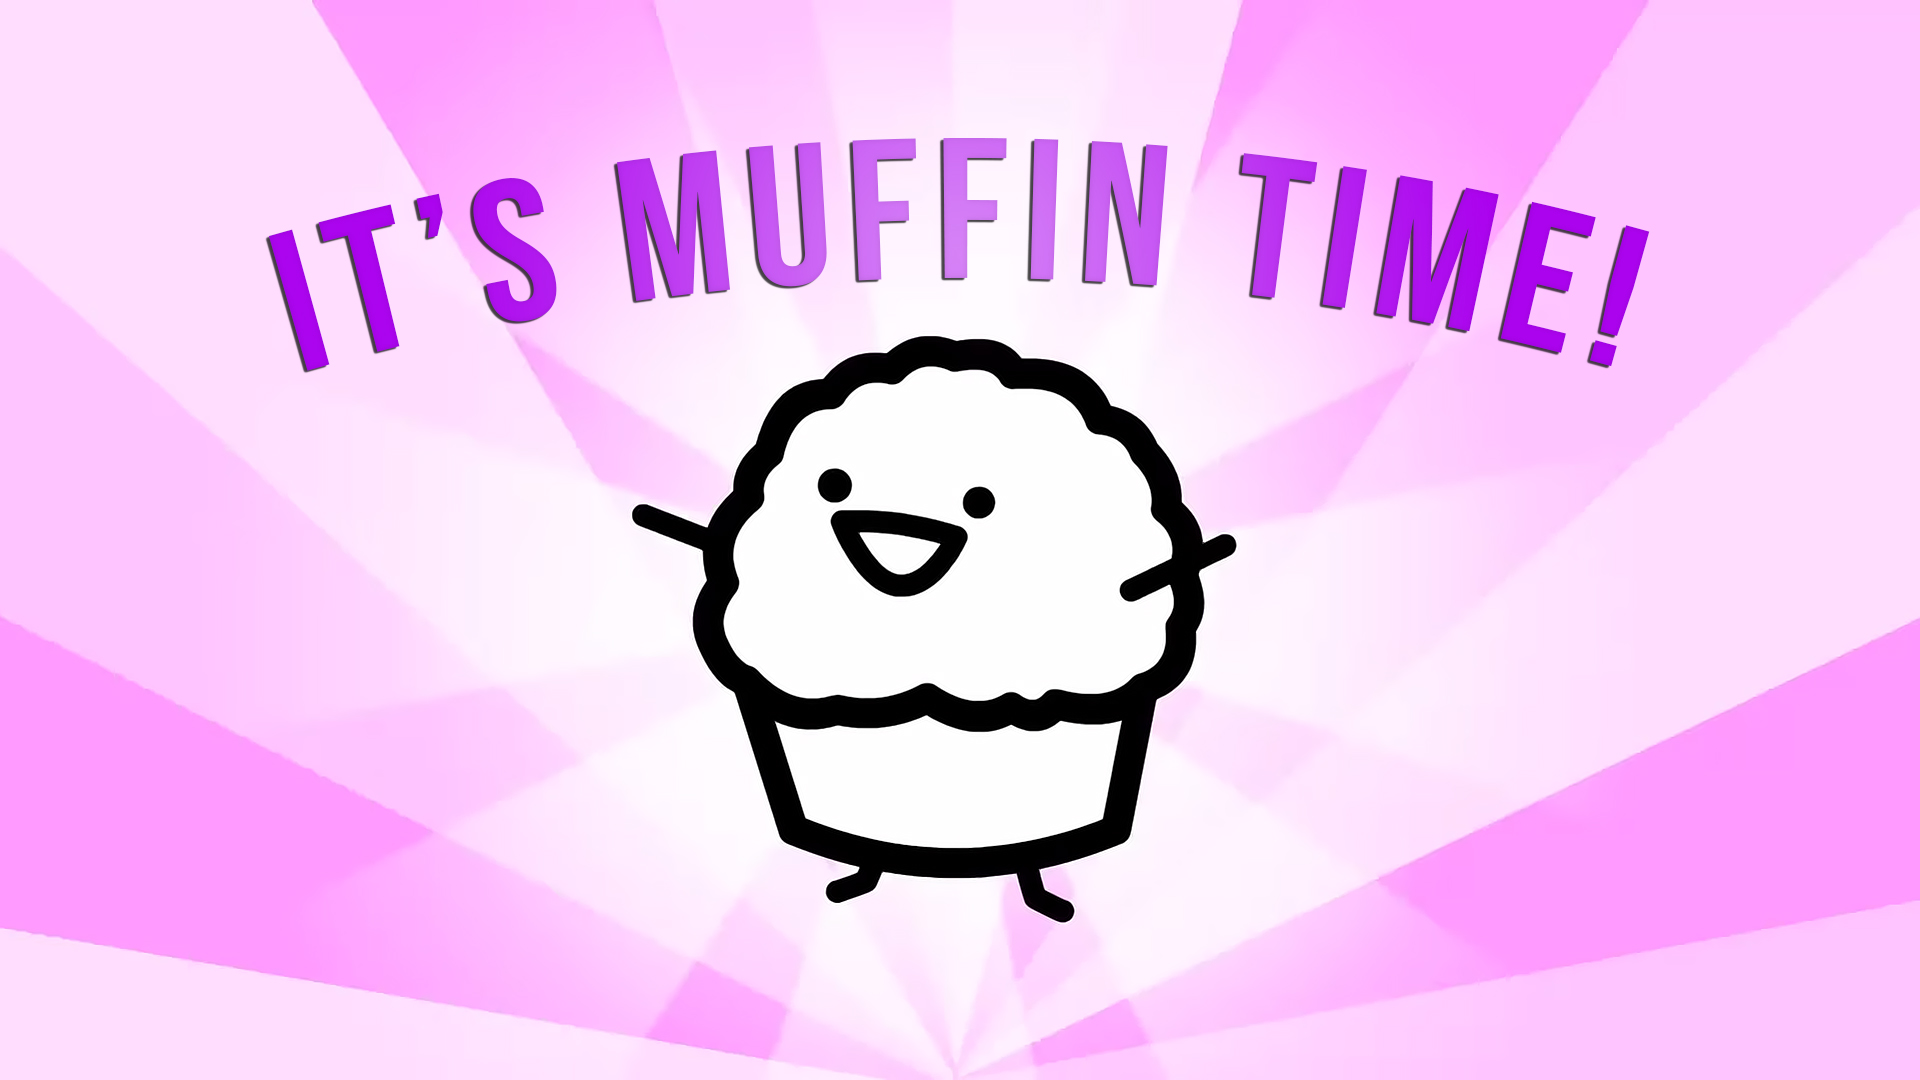 Muffin time wallpapers